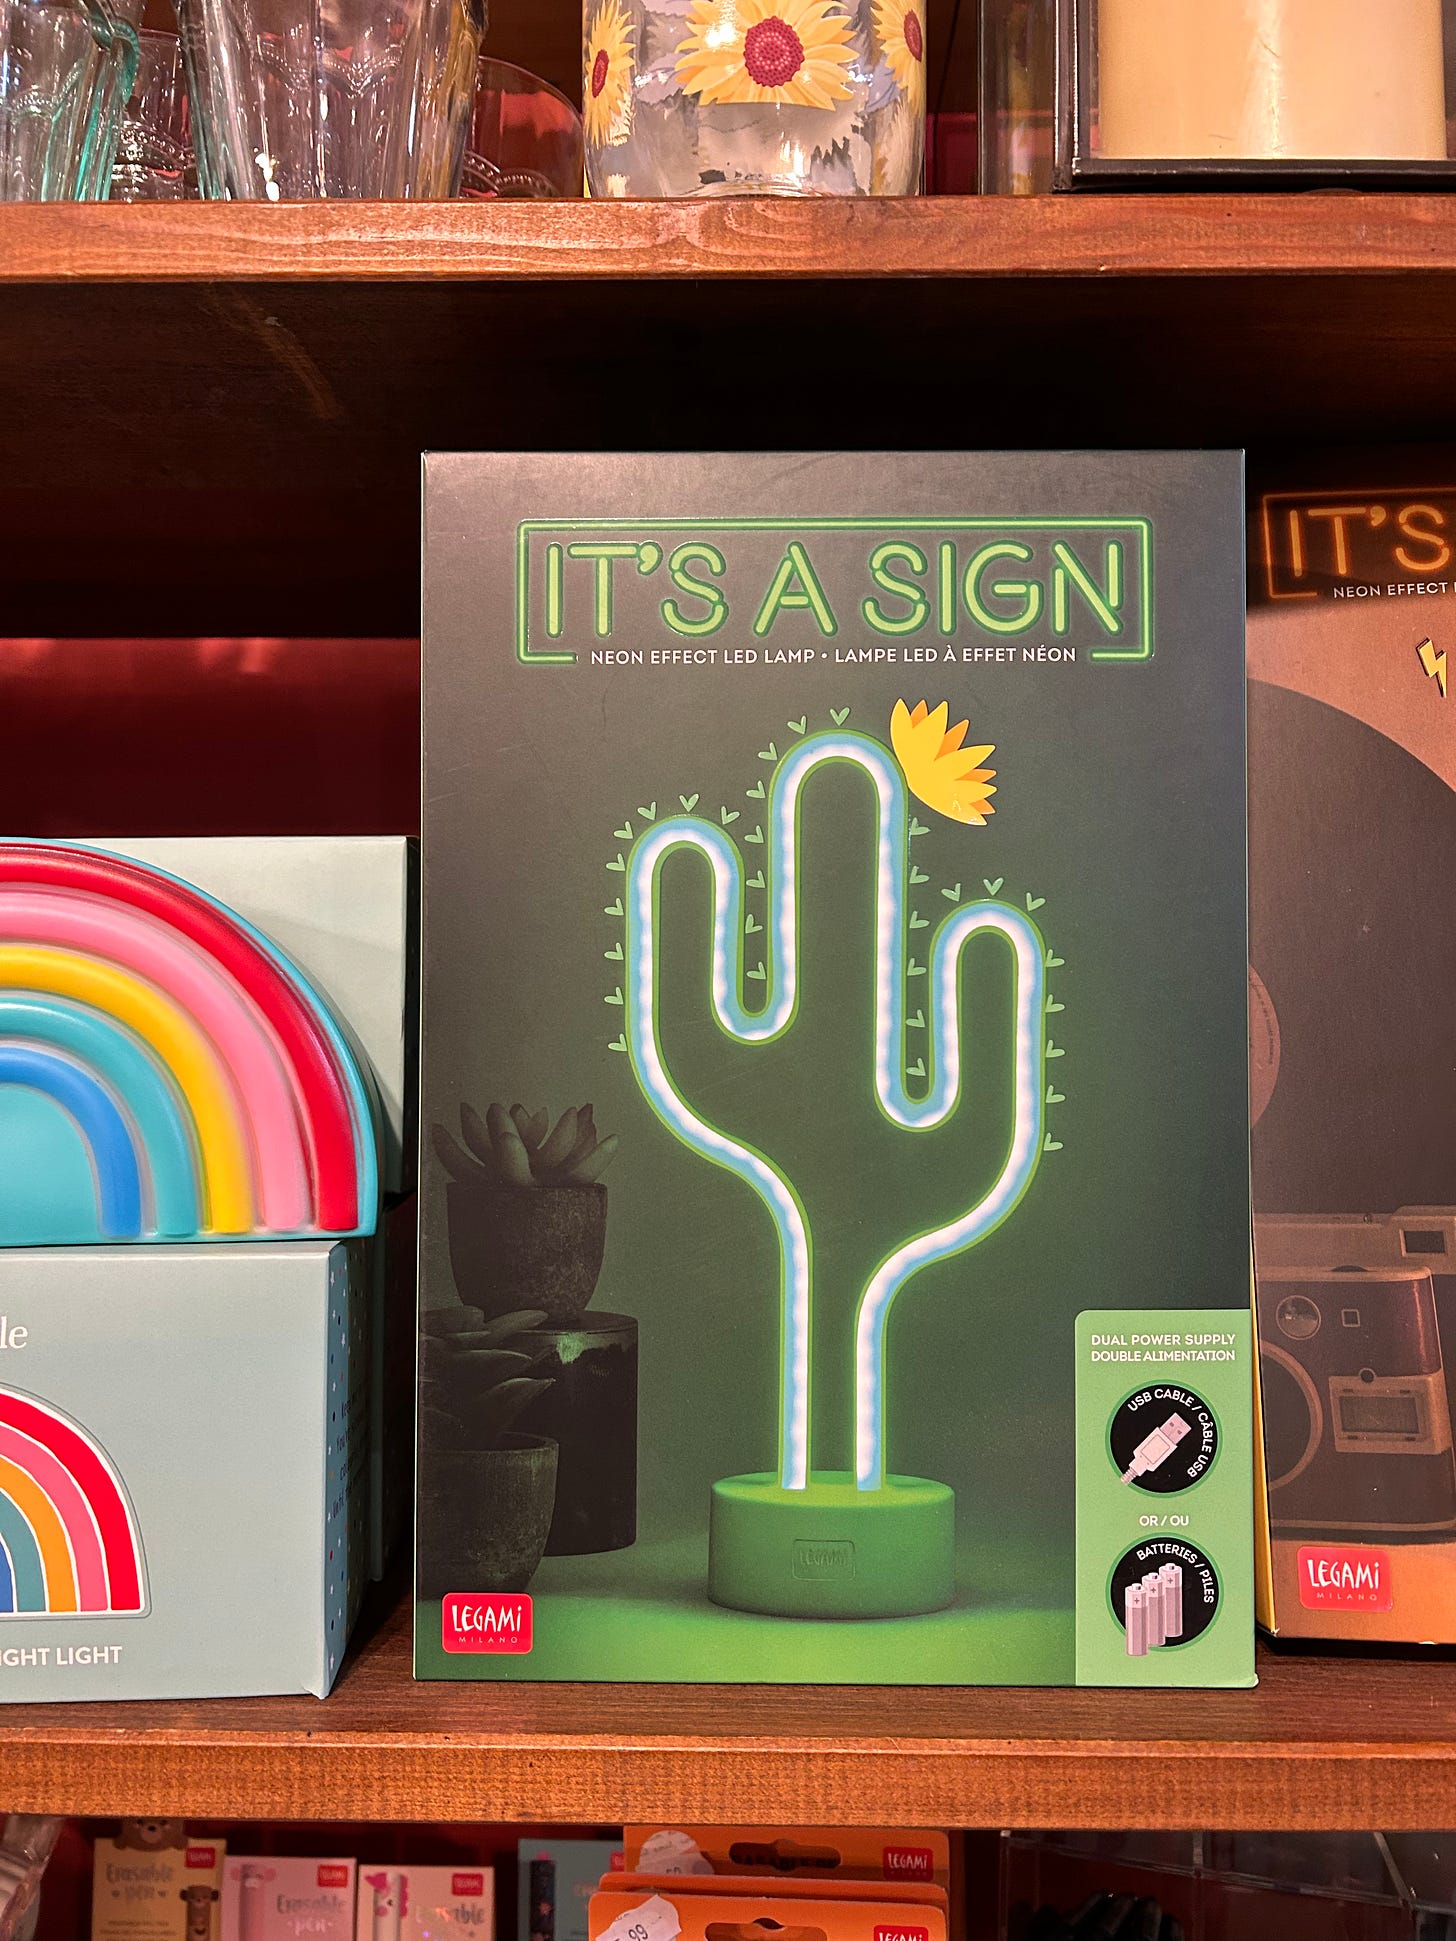 A box sitting on a shelf that shows a bright green neon lamp in the shape of a cactus. Above the neon lamp are the words IT'S A SIGN in bright green block lettering.